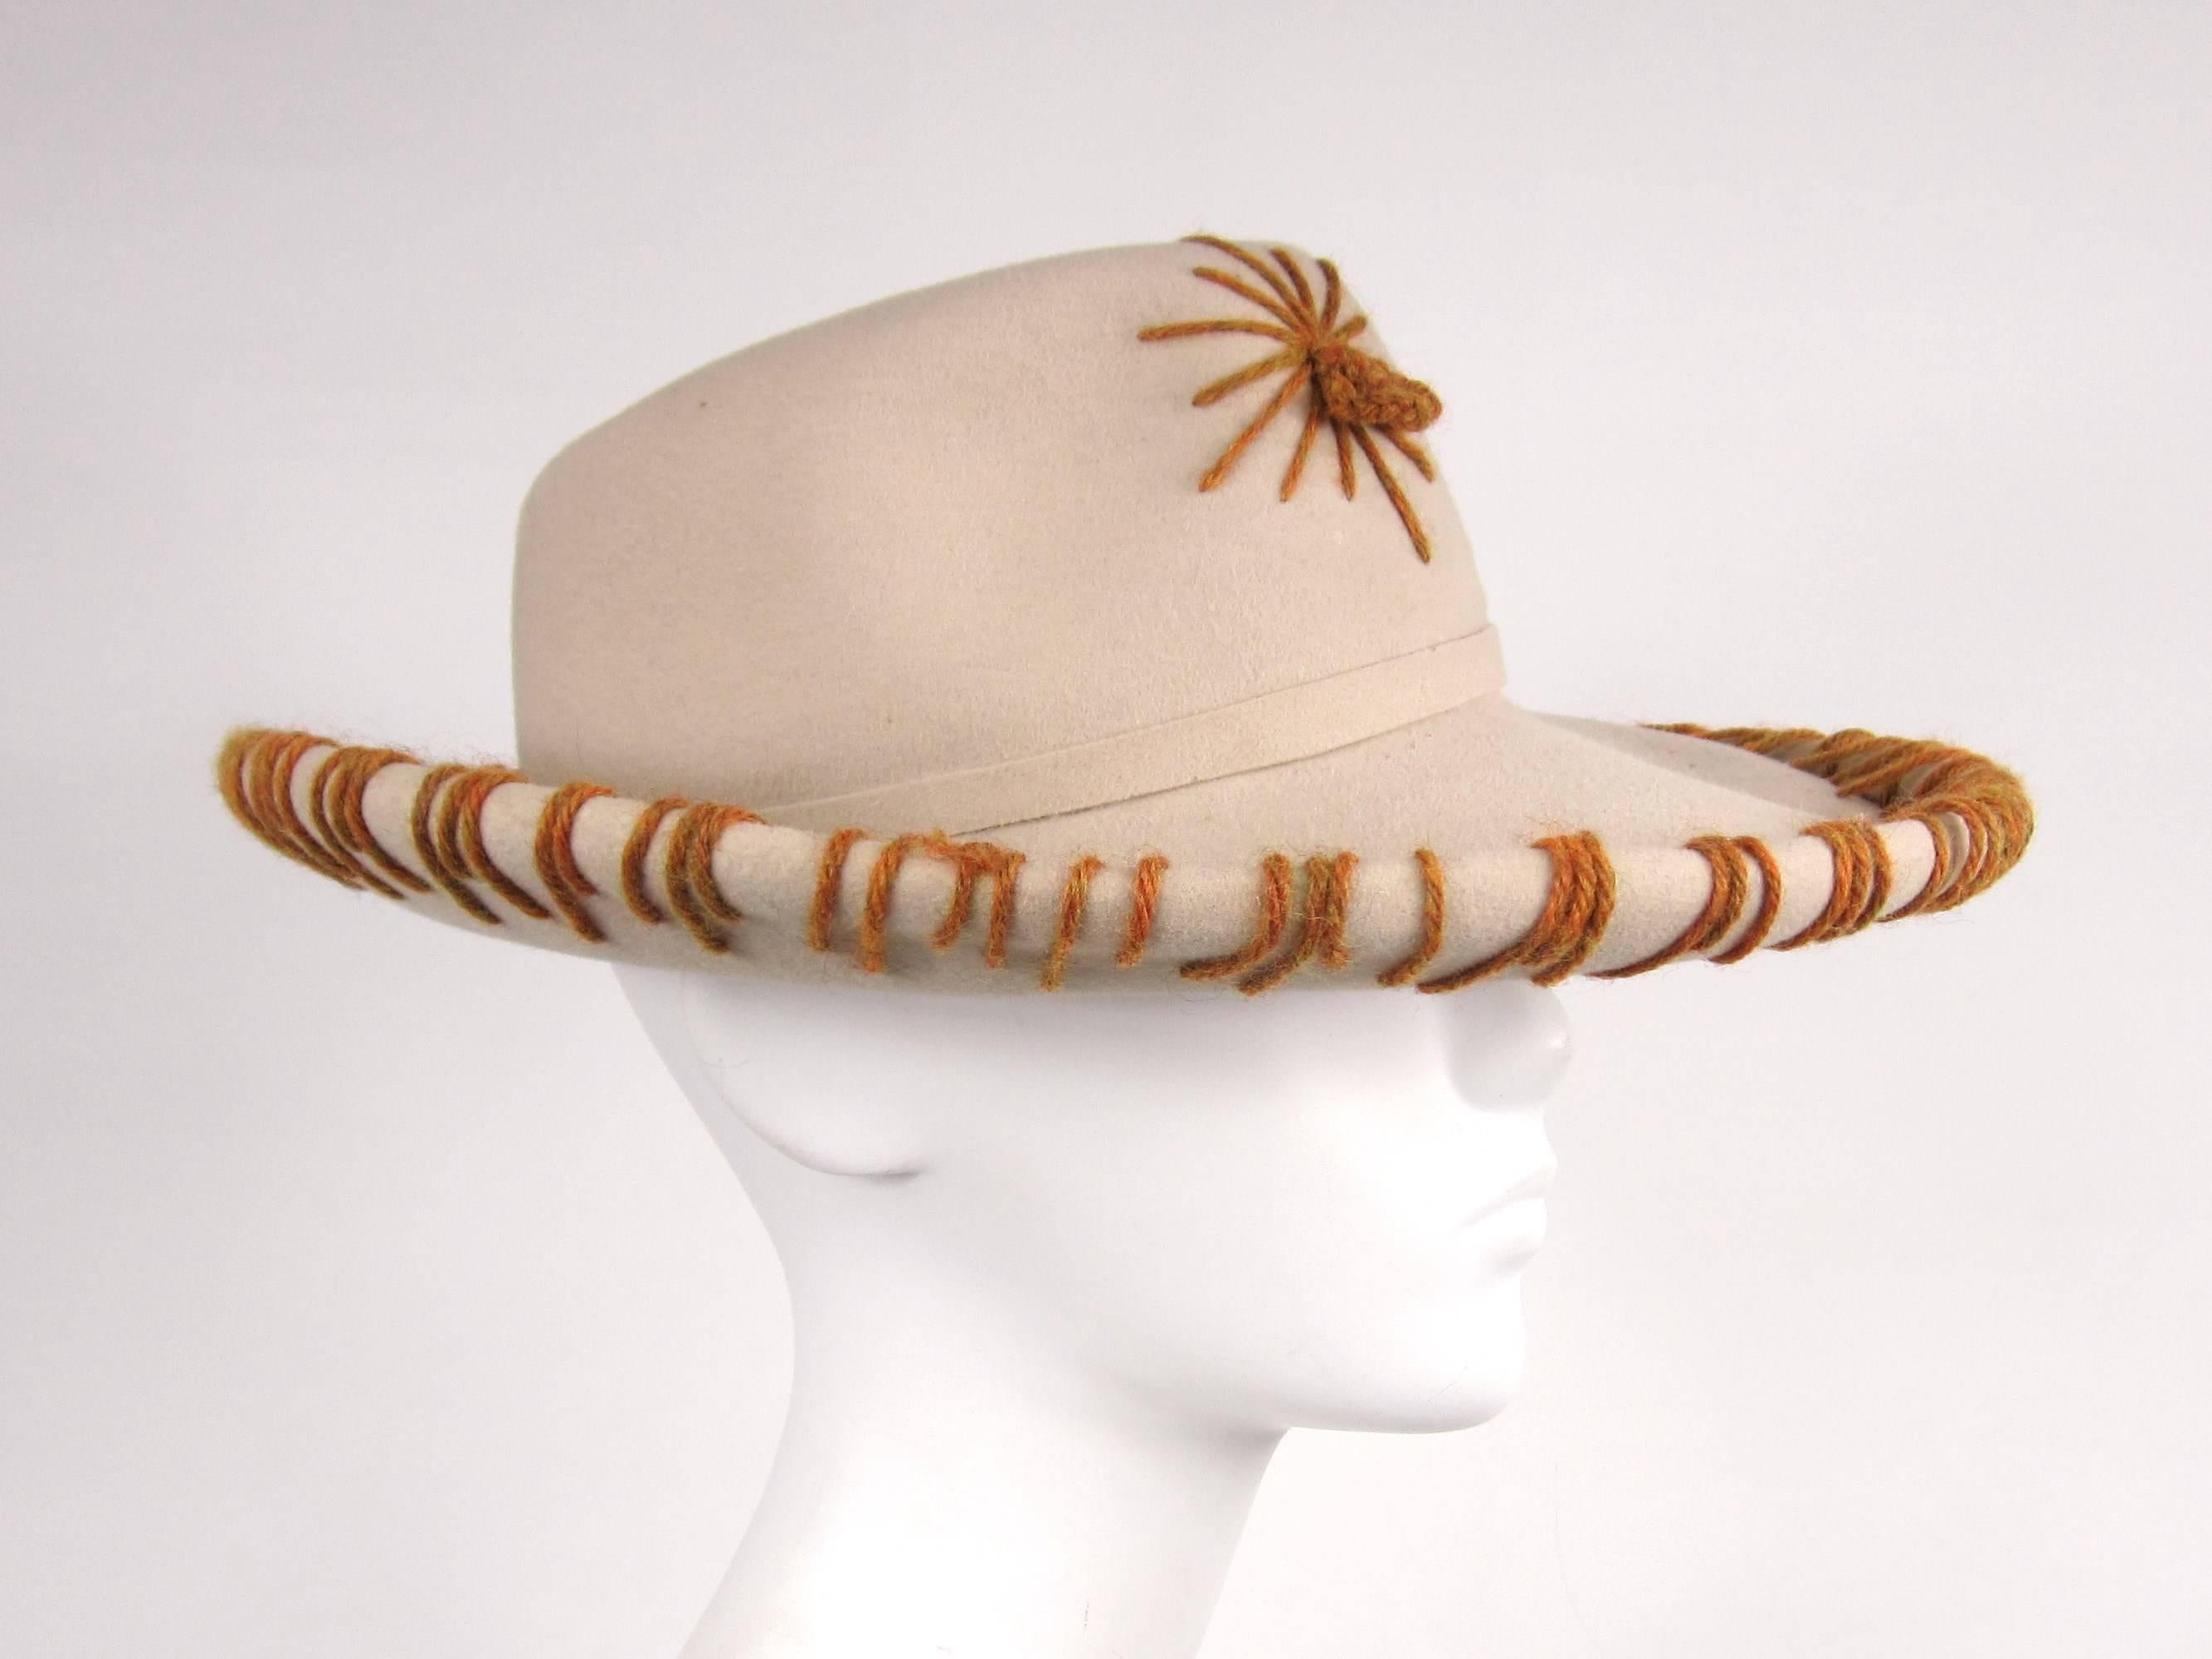 whip stitched around the Brim 
Stitched Spider on the Hat 
Super Cool 
It measures 22.5